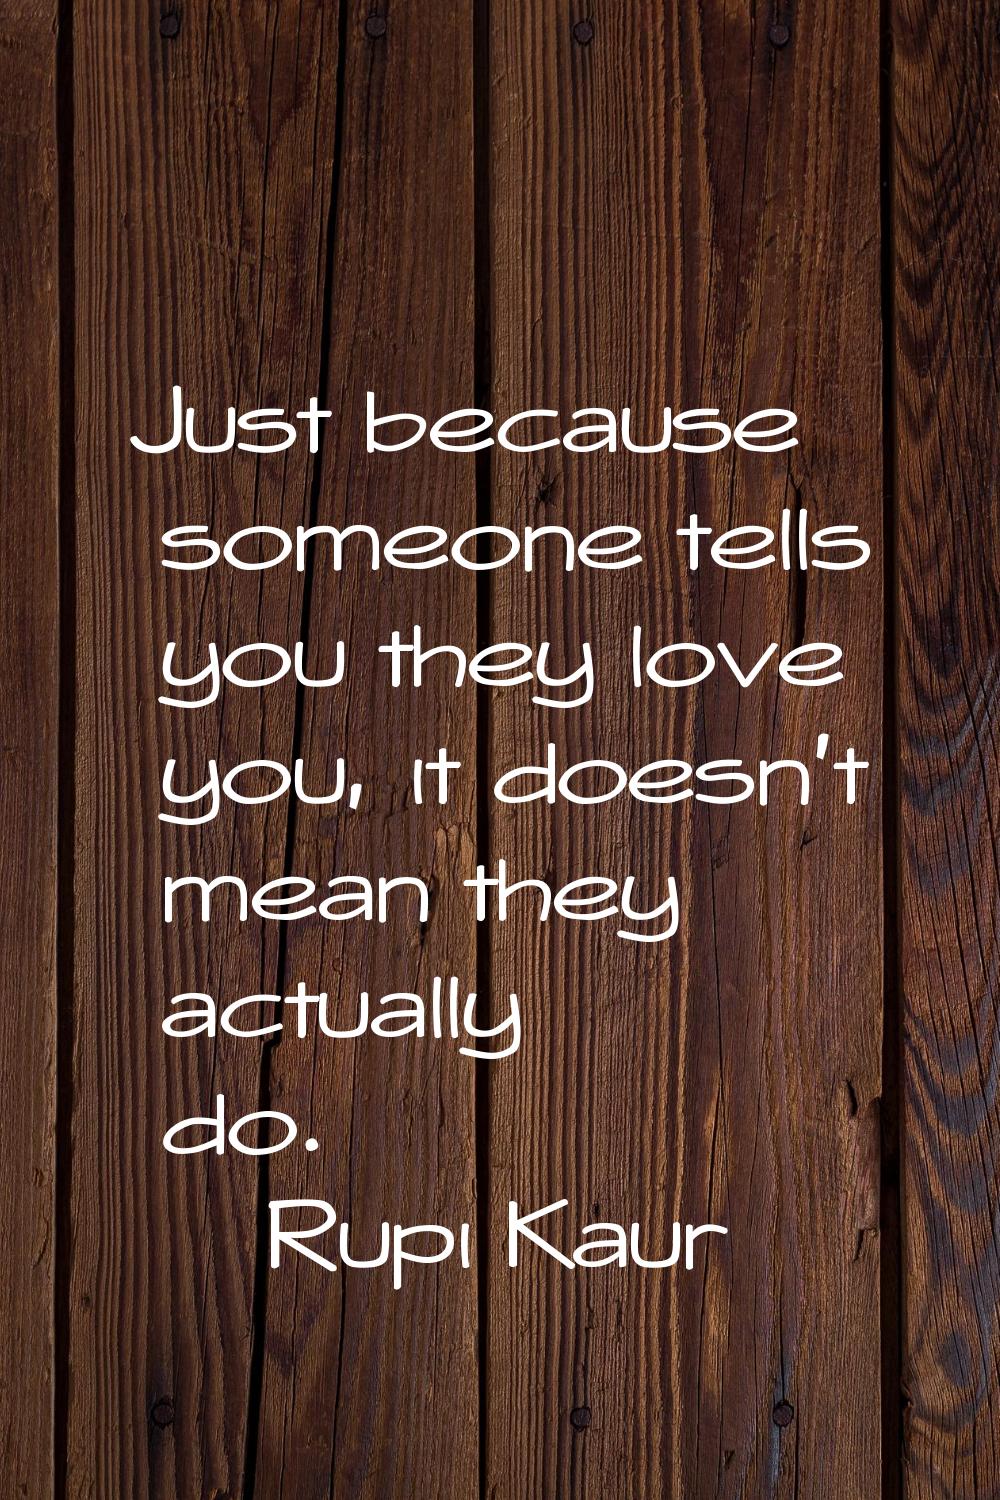 Just because someone tells you they love you, it doesn't mean they actually do.